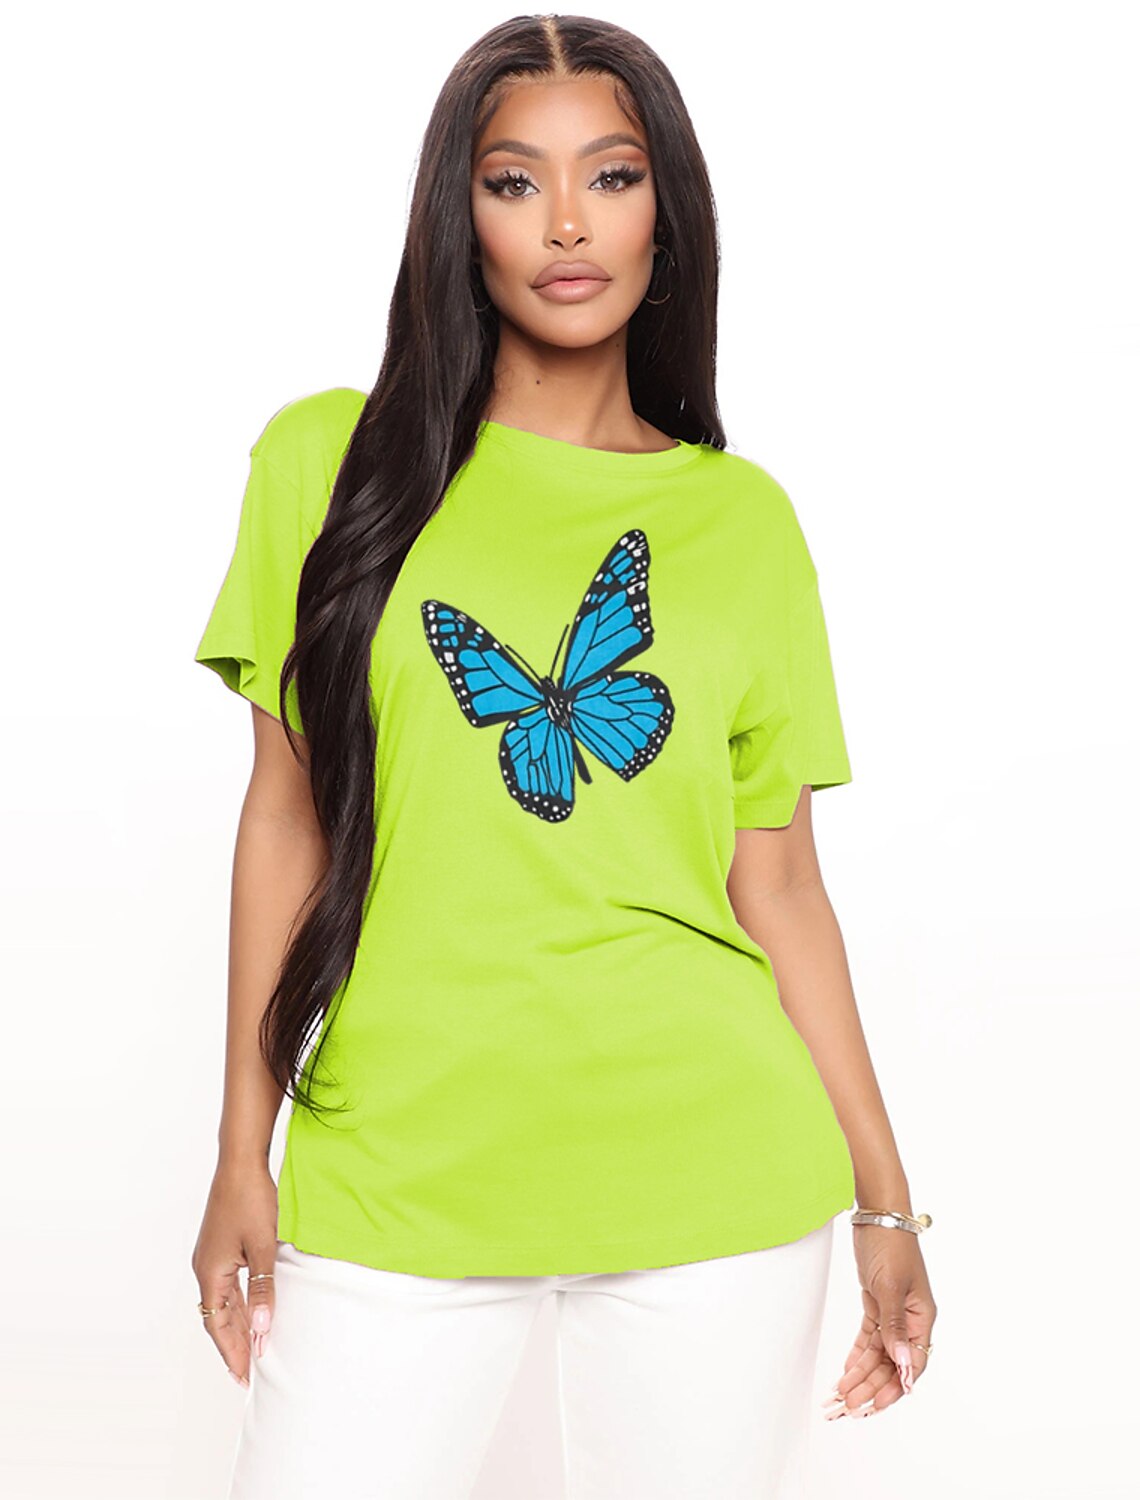 3/4 Sleeves Tops Womens Spring Butterflies Graphic T-Shirt Colorful 3D Print Tunic Blouse Casual Crewneck Tee Shirts